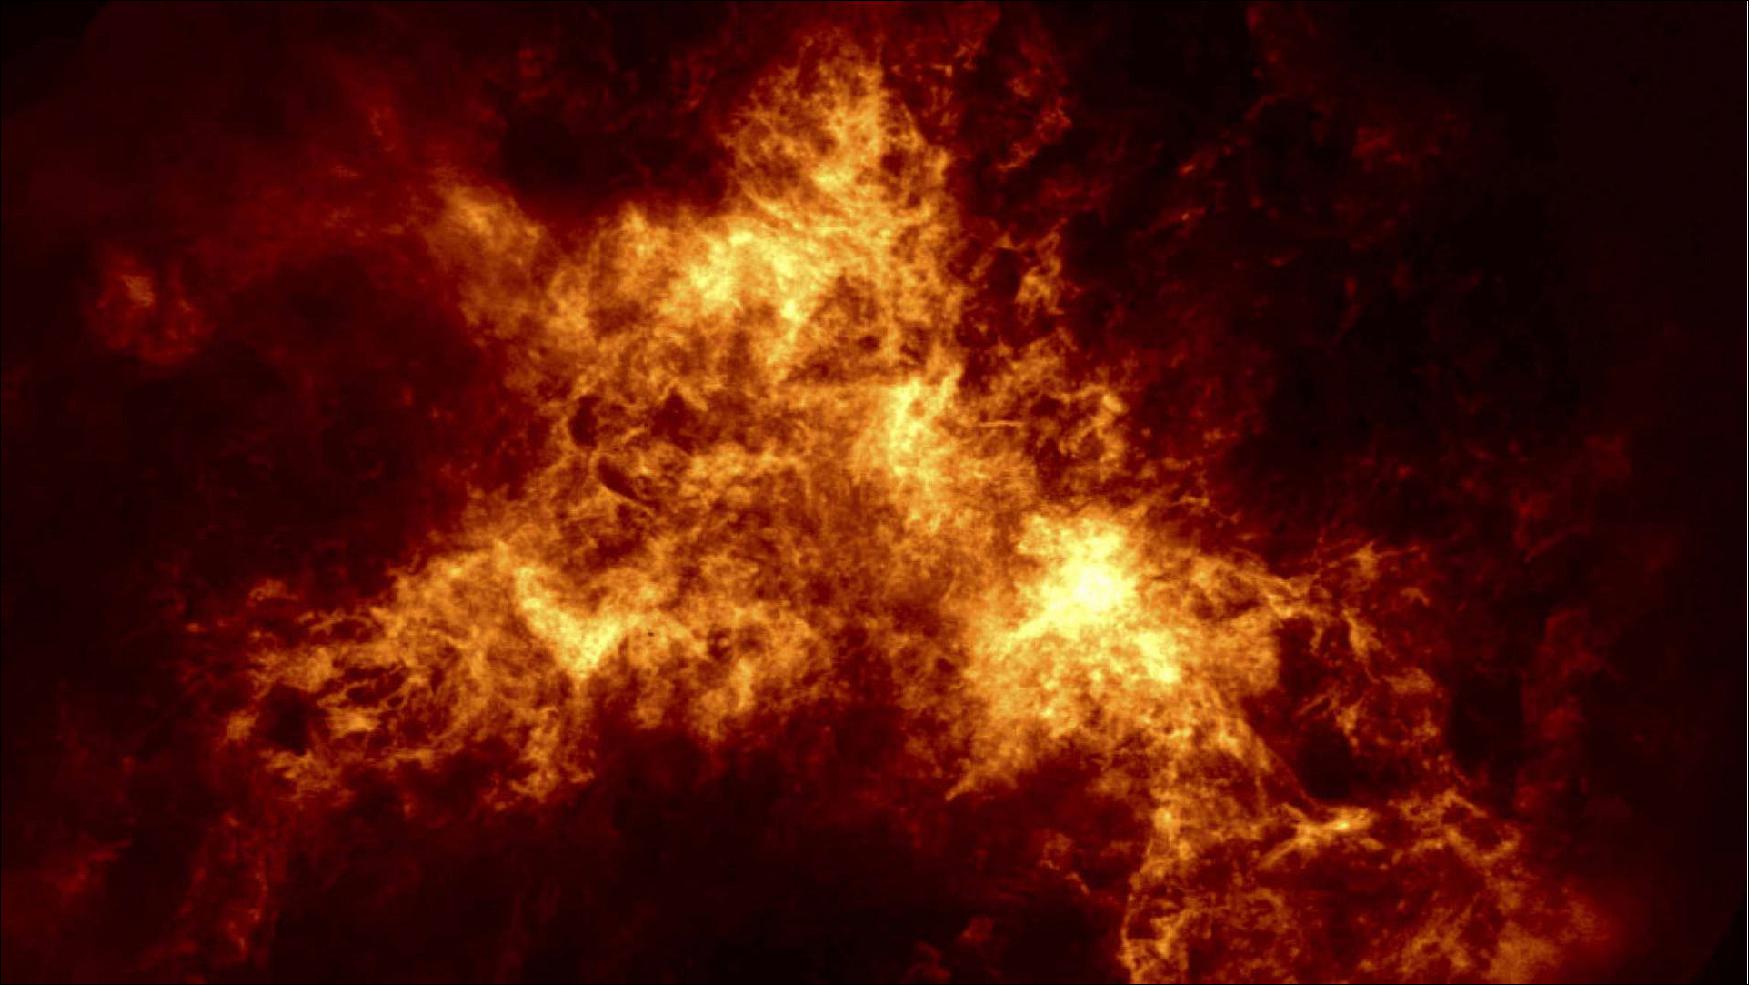 Figure 52: Atomic hydrogen gas in the Small Magellanic Cloud as imaged with CSIRO’s ASKAP at MRO in 2017 (image credit: ANU and CSIRO)